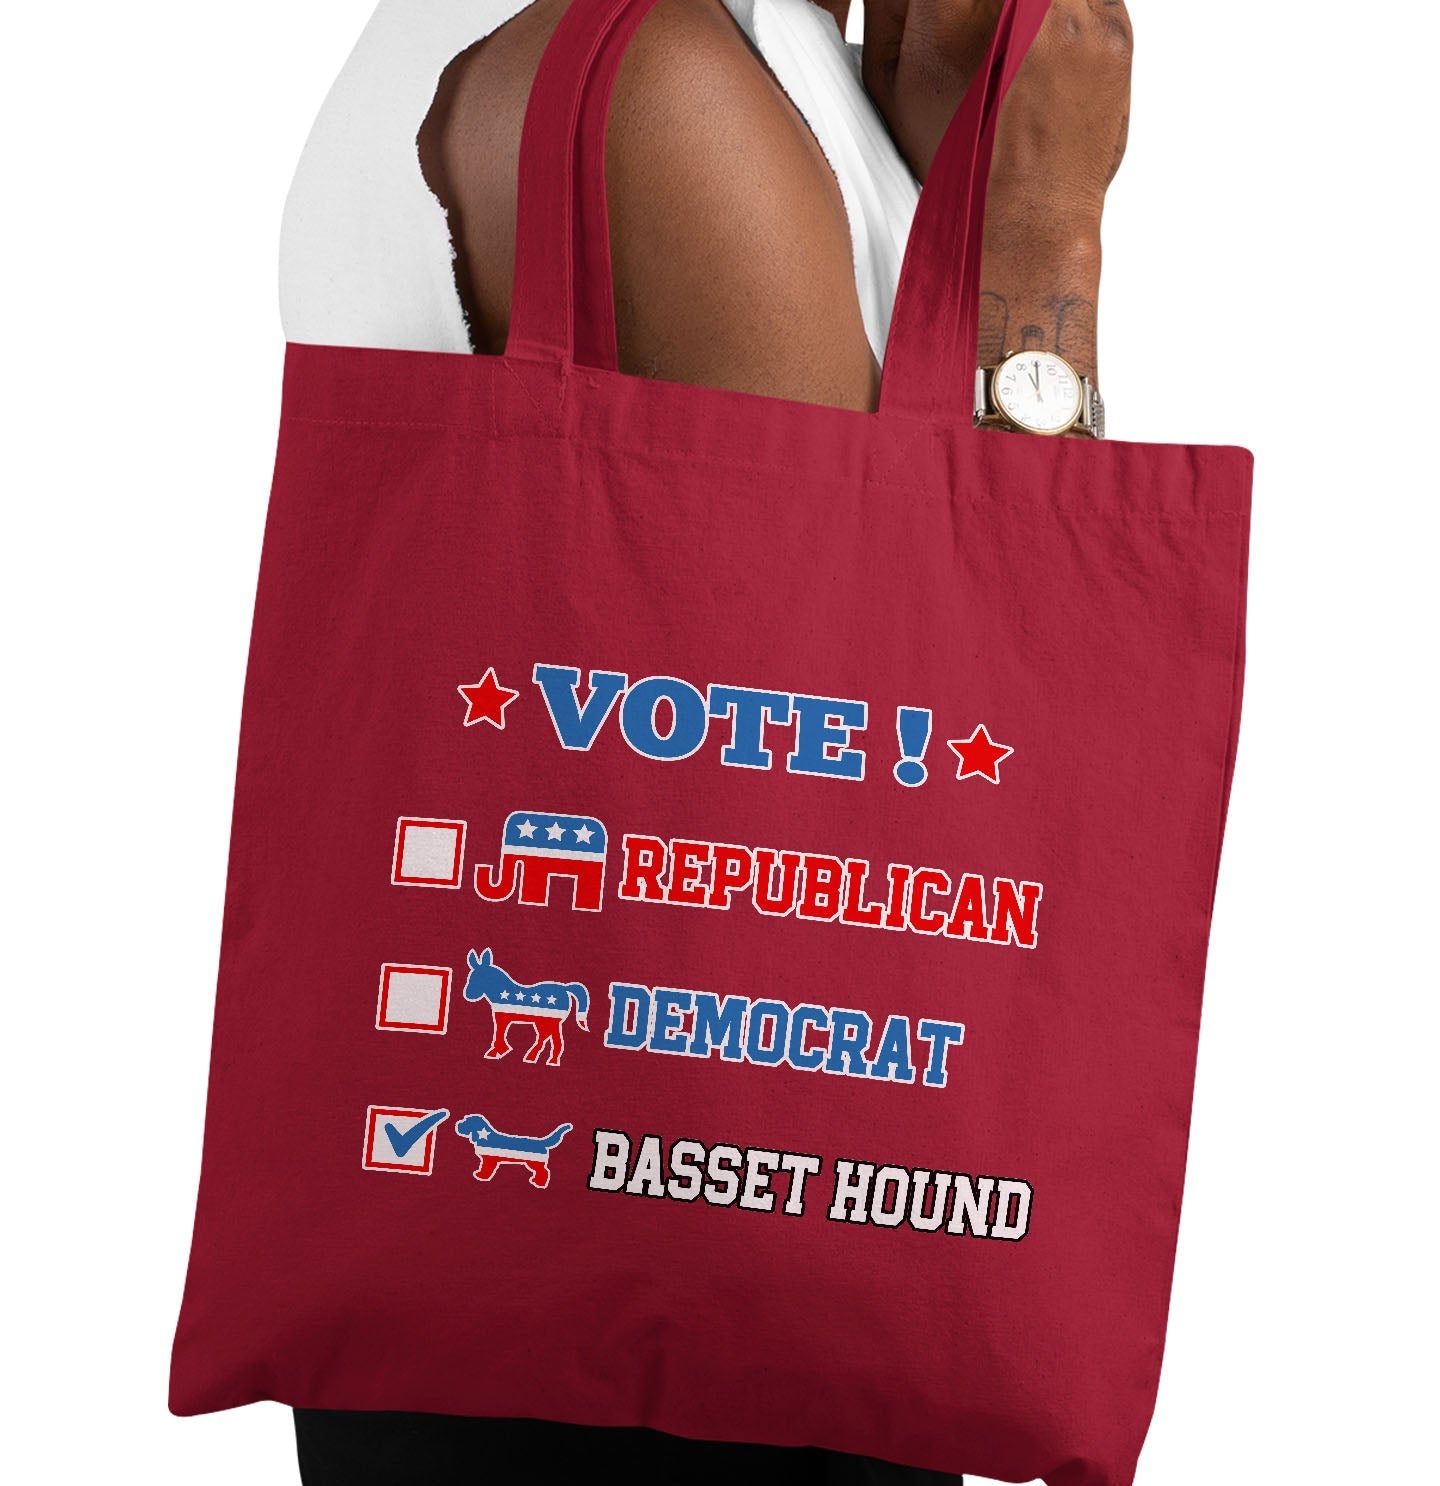 Vote for the Basset Hound - Cotton Canvas Tote